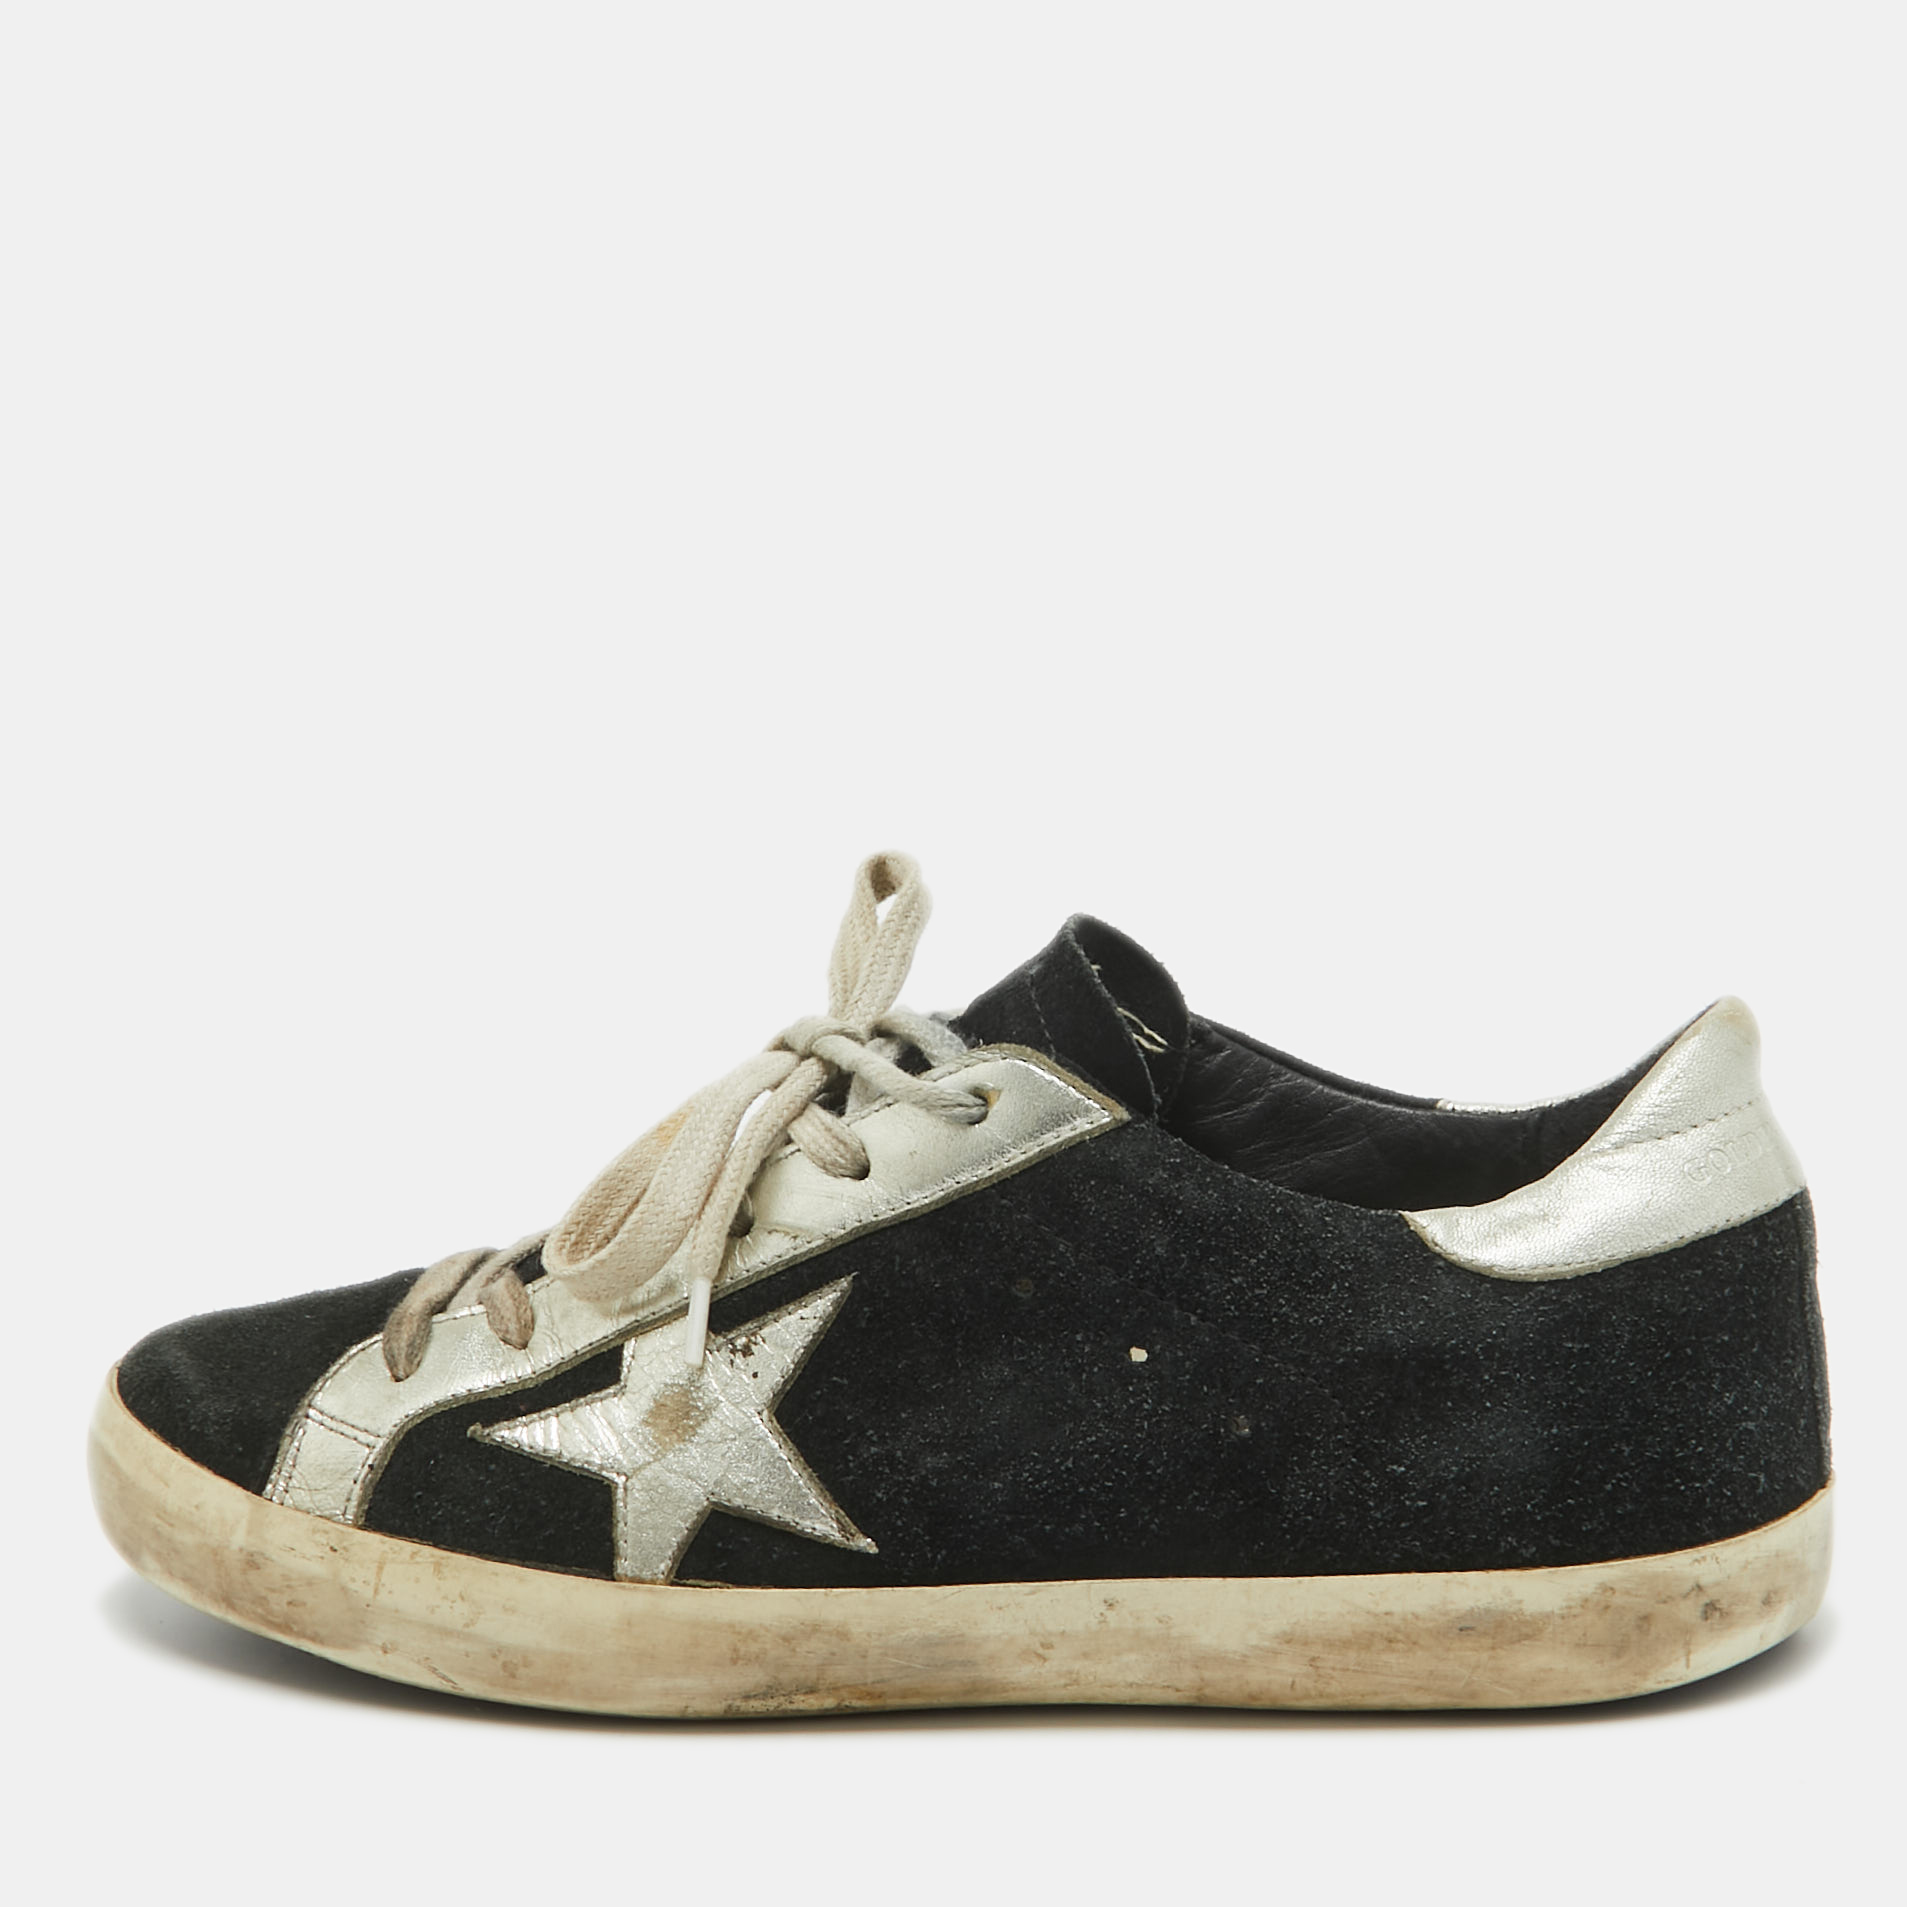 Golden goose black suede superstar lace up sneakers size 38